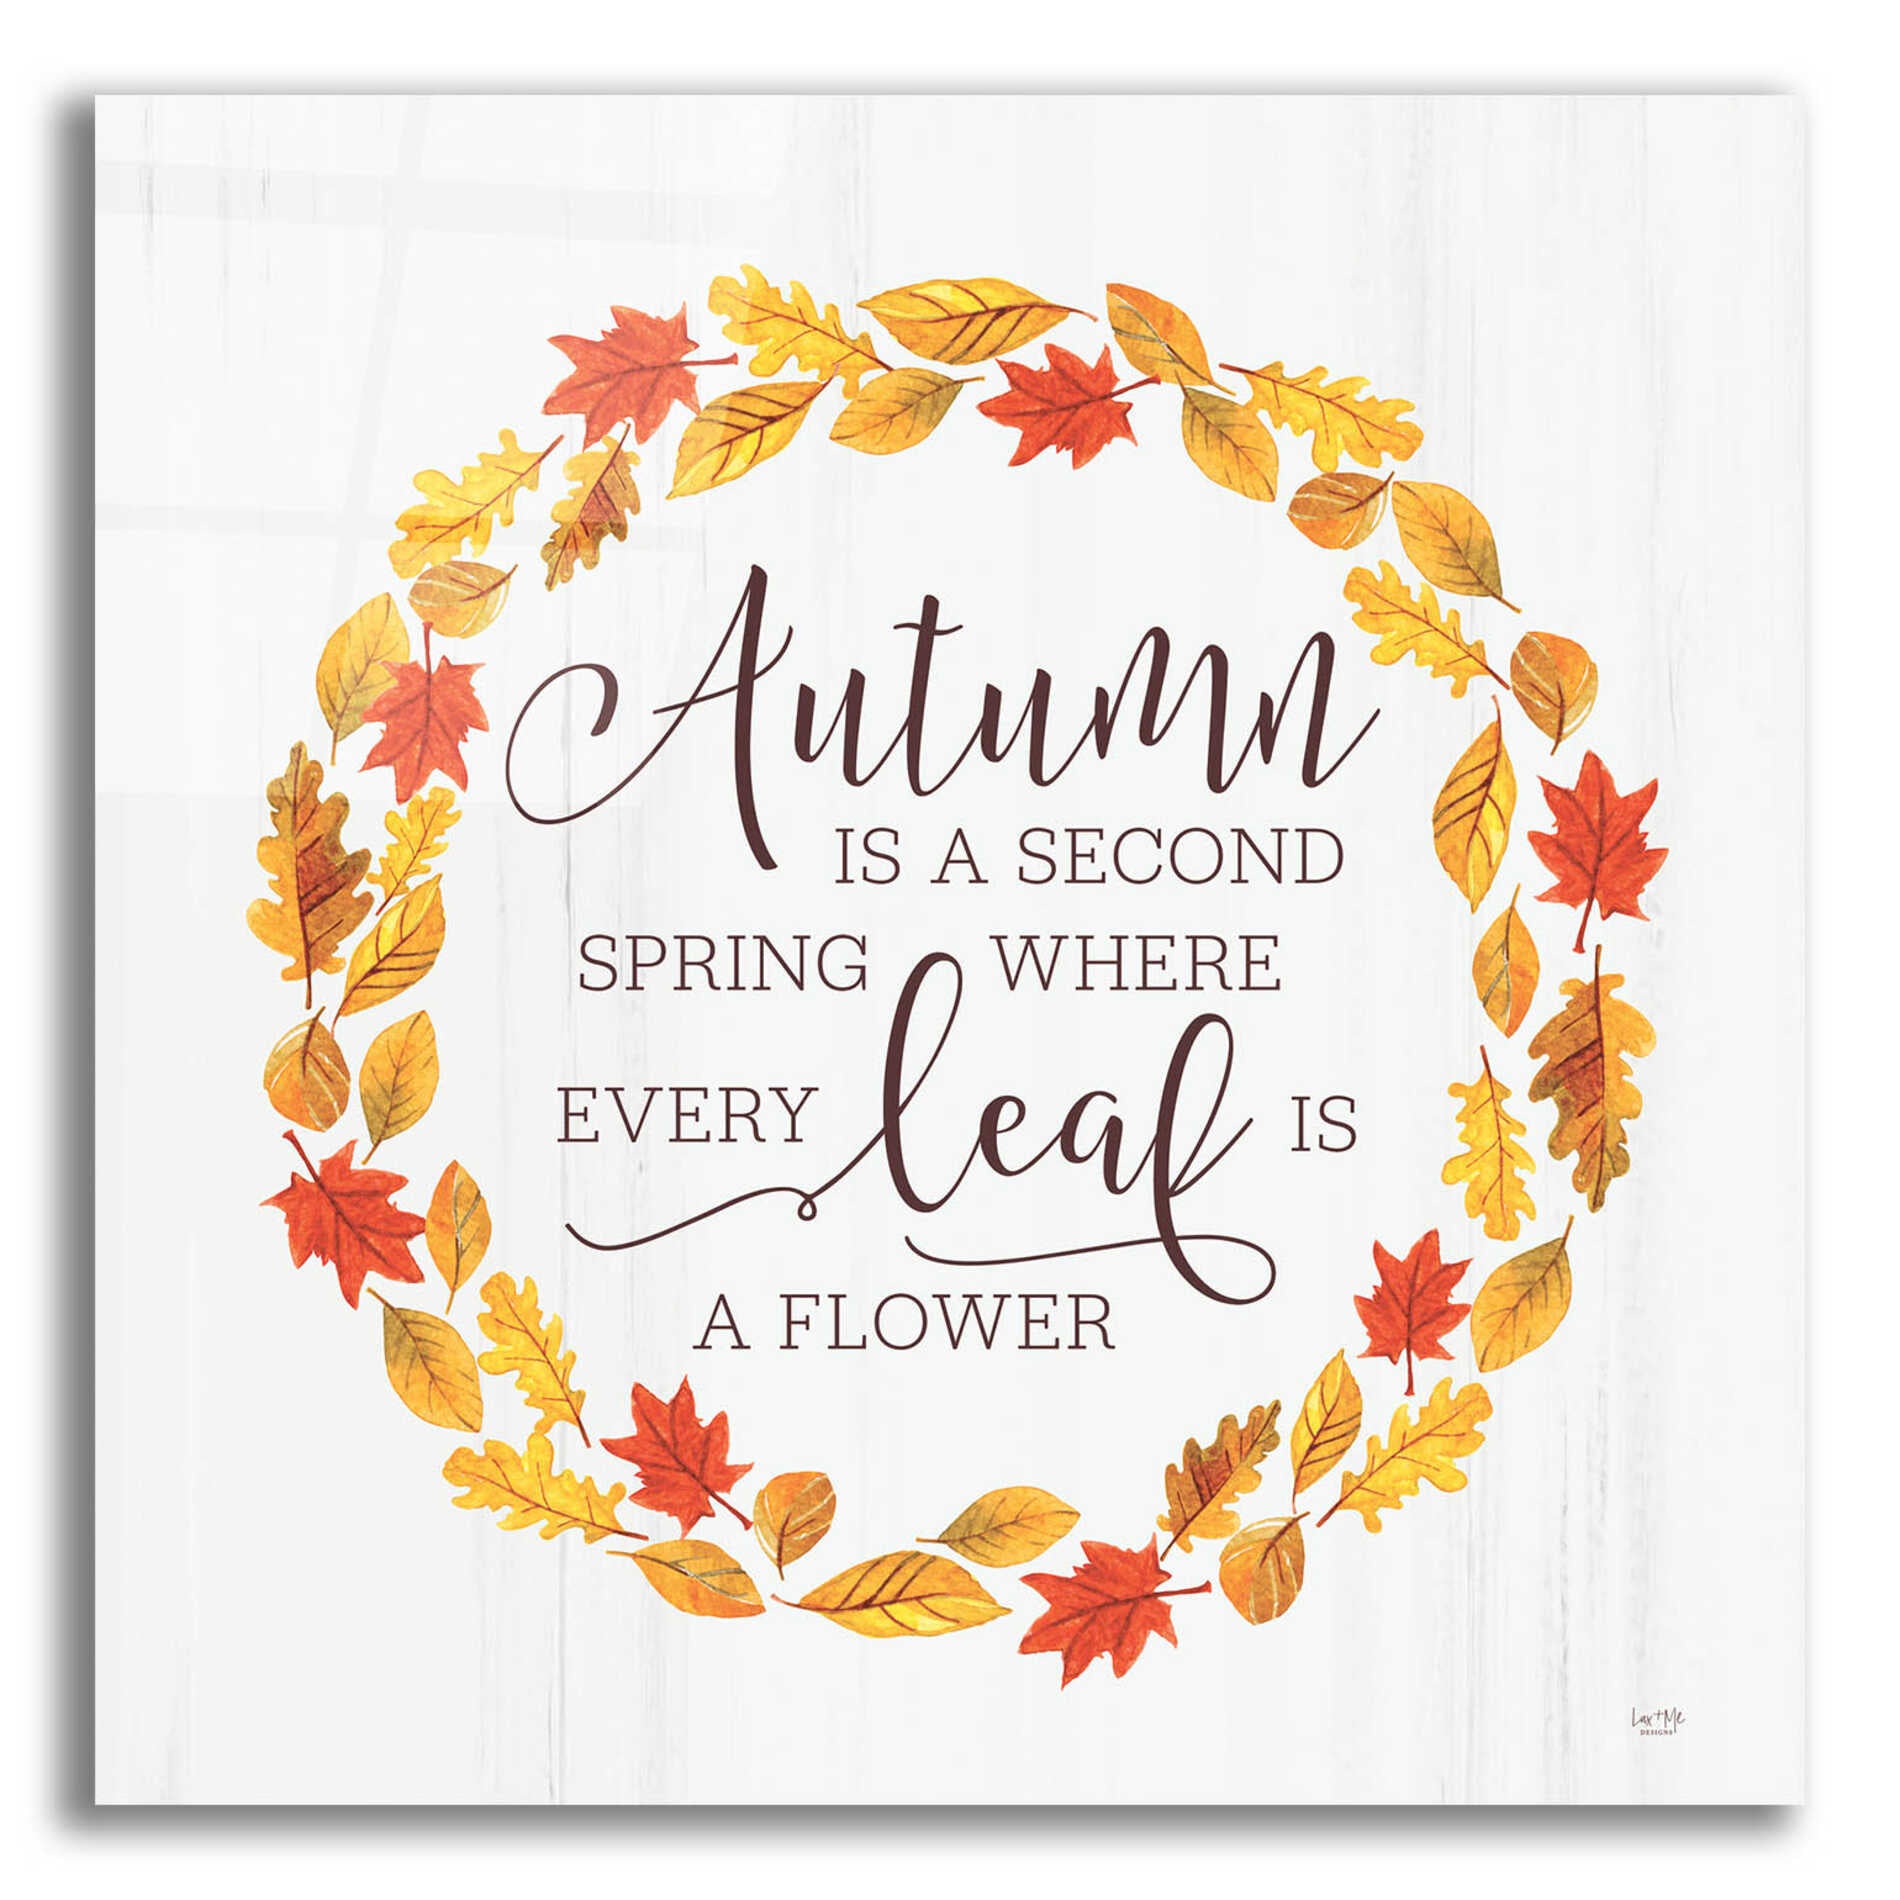 Epic Art 'Autumn is a Second Spring' by Lux + Me Designs, Acrylic Glass Wall Art